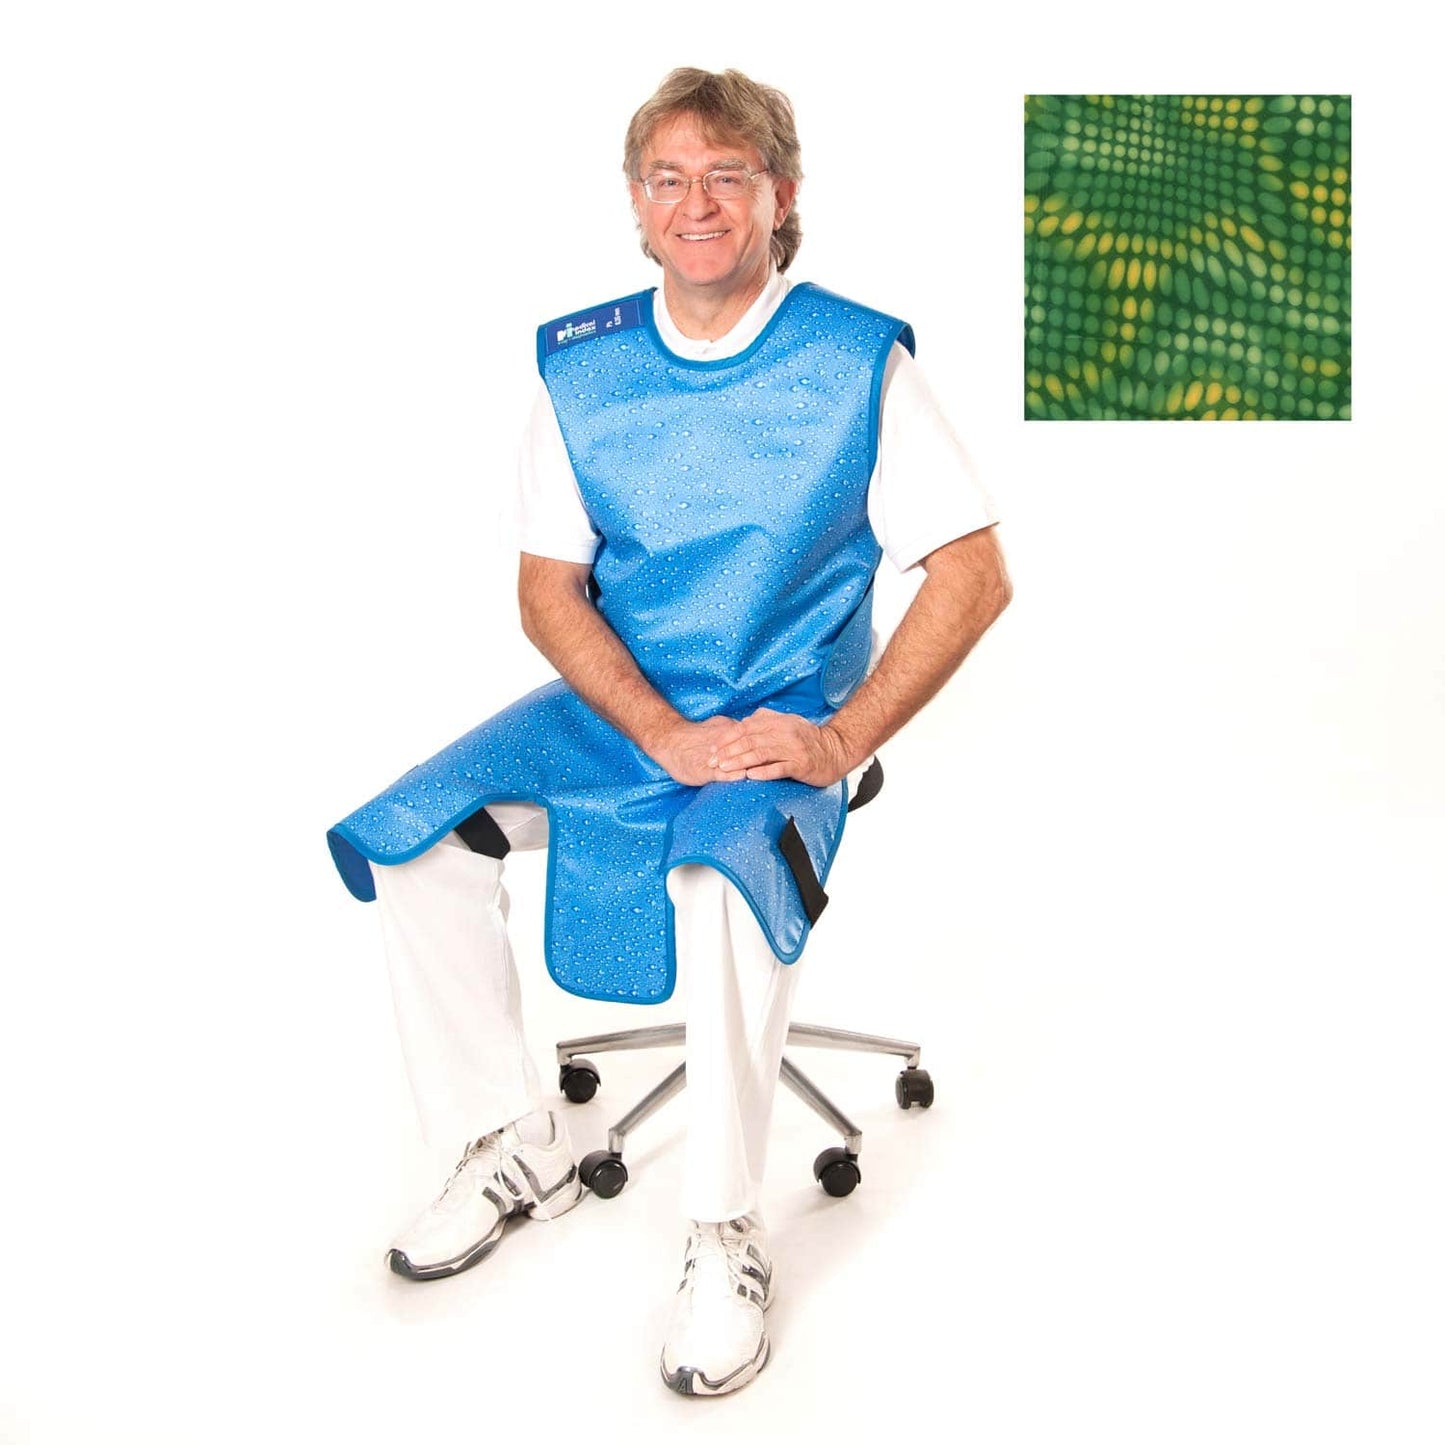 Urological Front Apron From Medical Index Especially For Examinations In Sitting Position